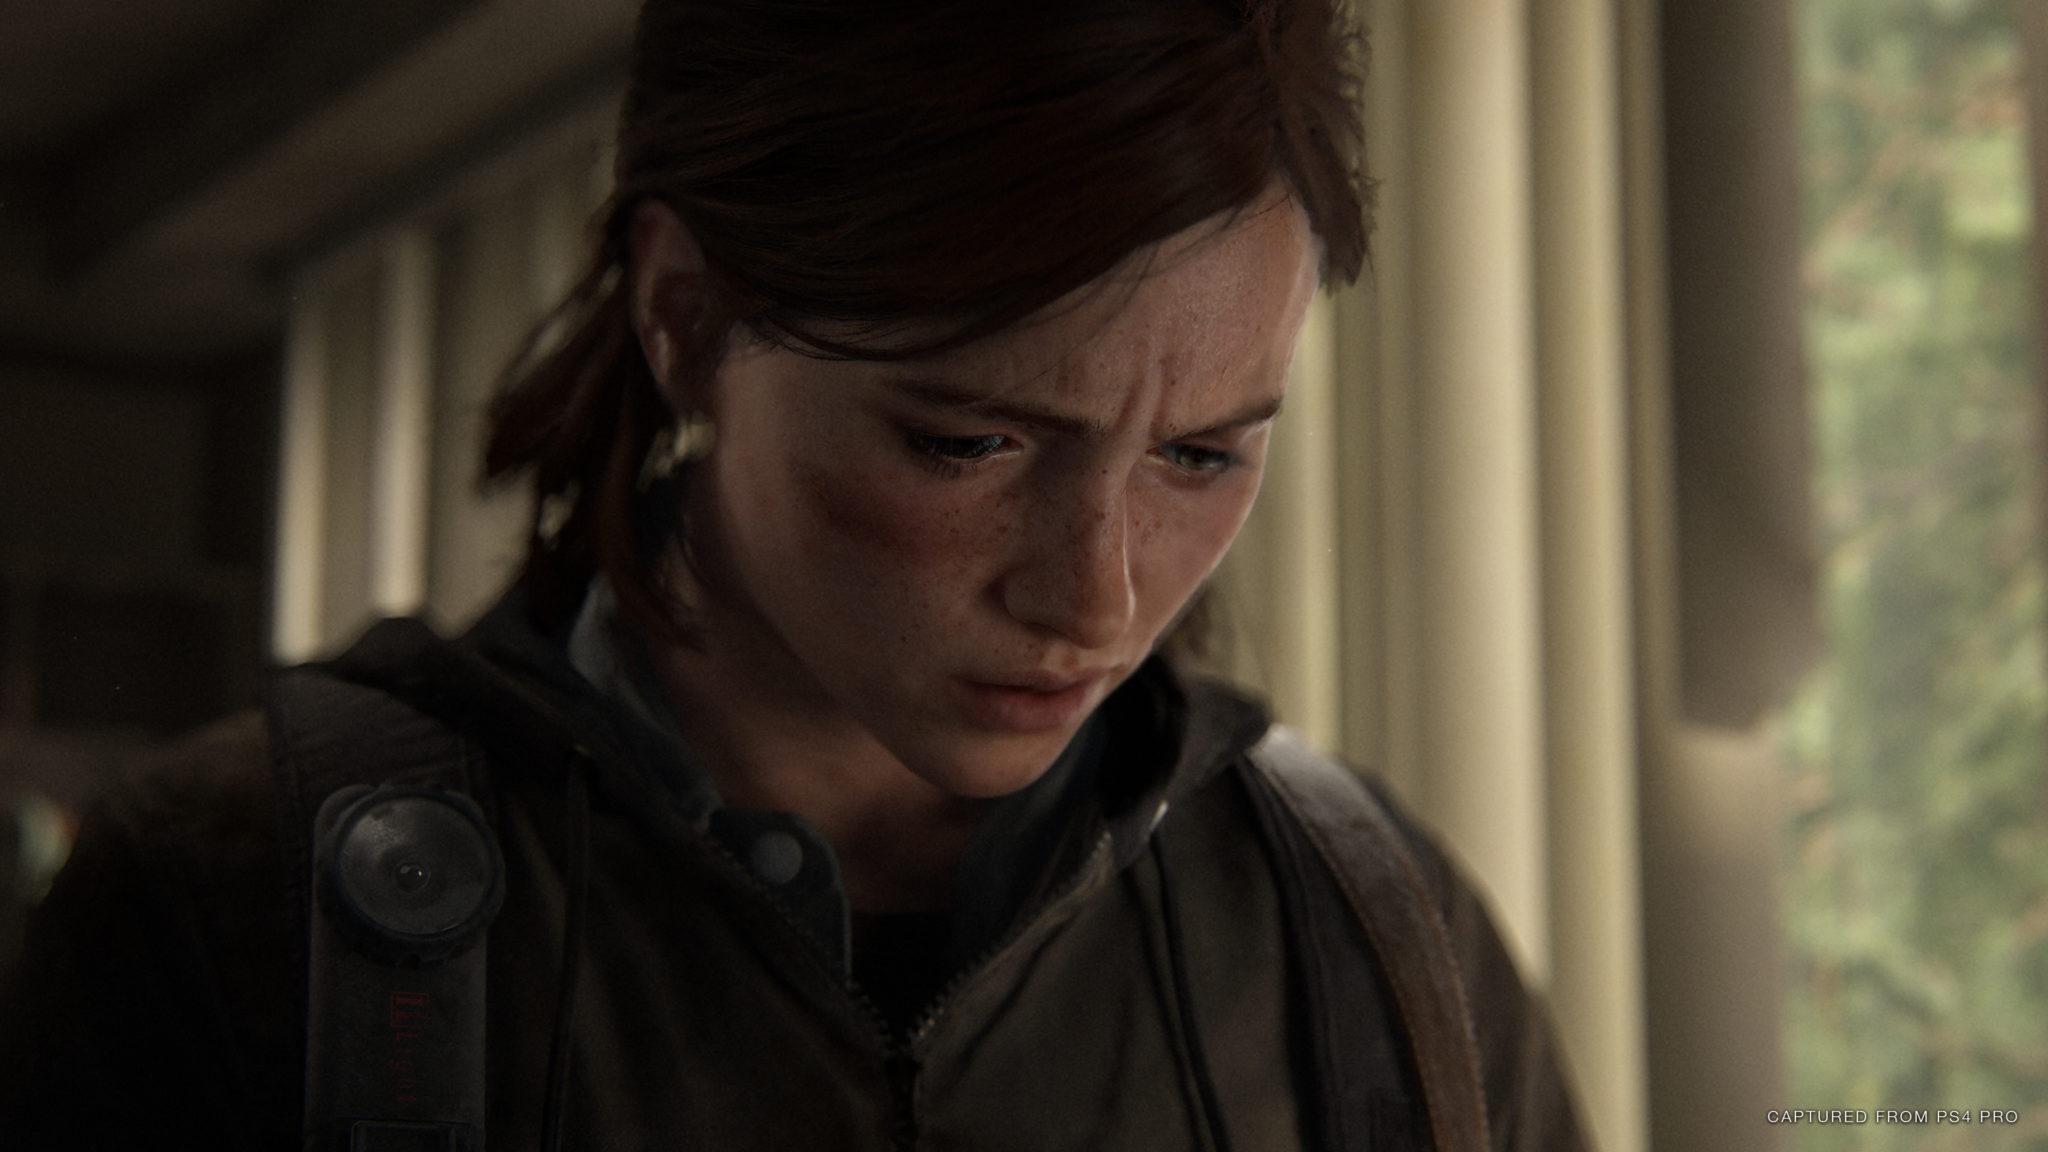 There many not be another The Last of Us sequel from Naughty Dog if the devs can't find the 